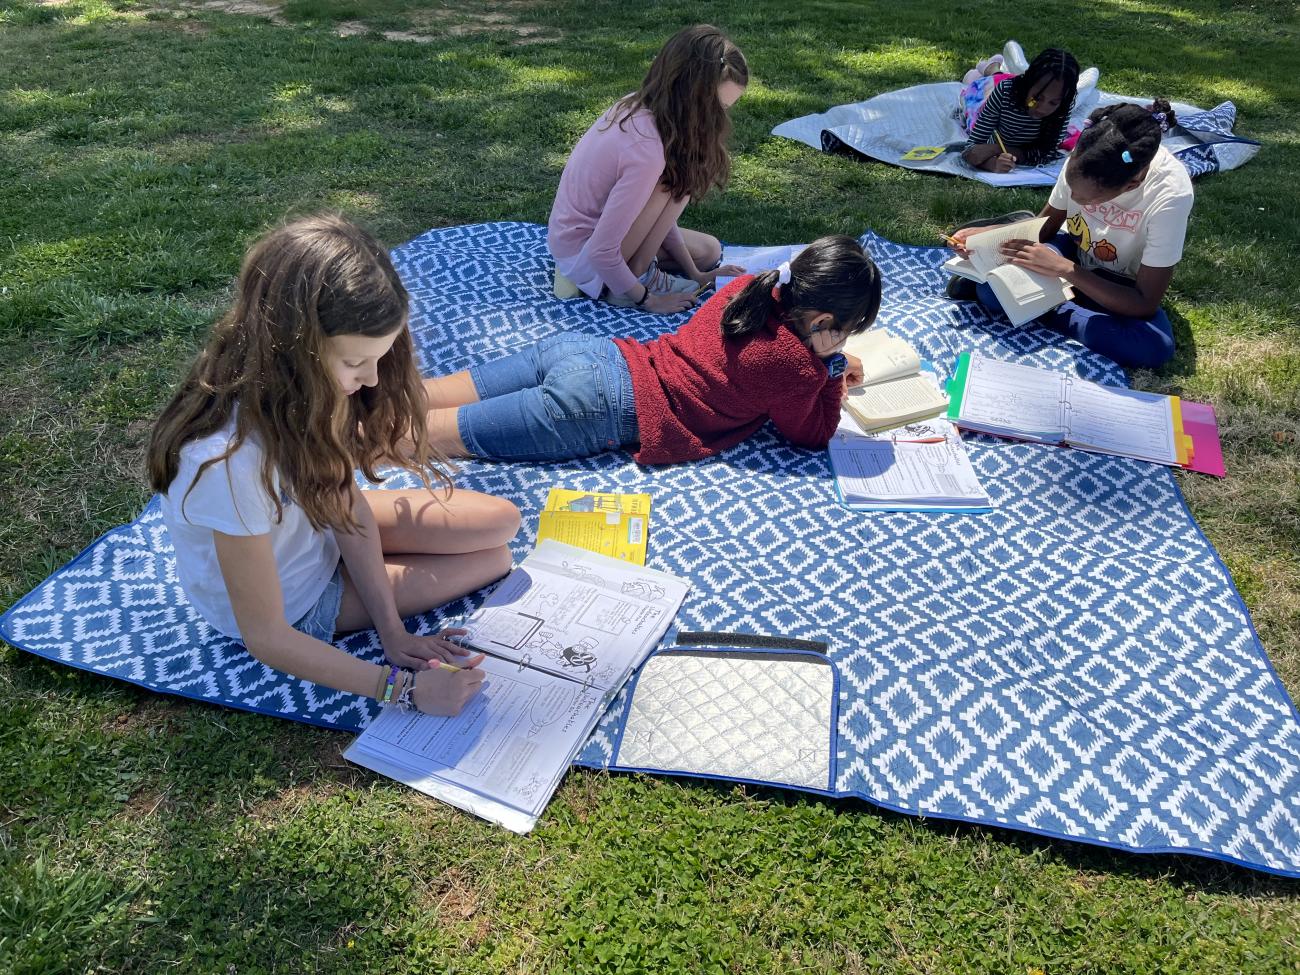 4 young girls doing schoolwork outside on a picnic blanket